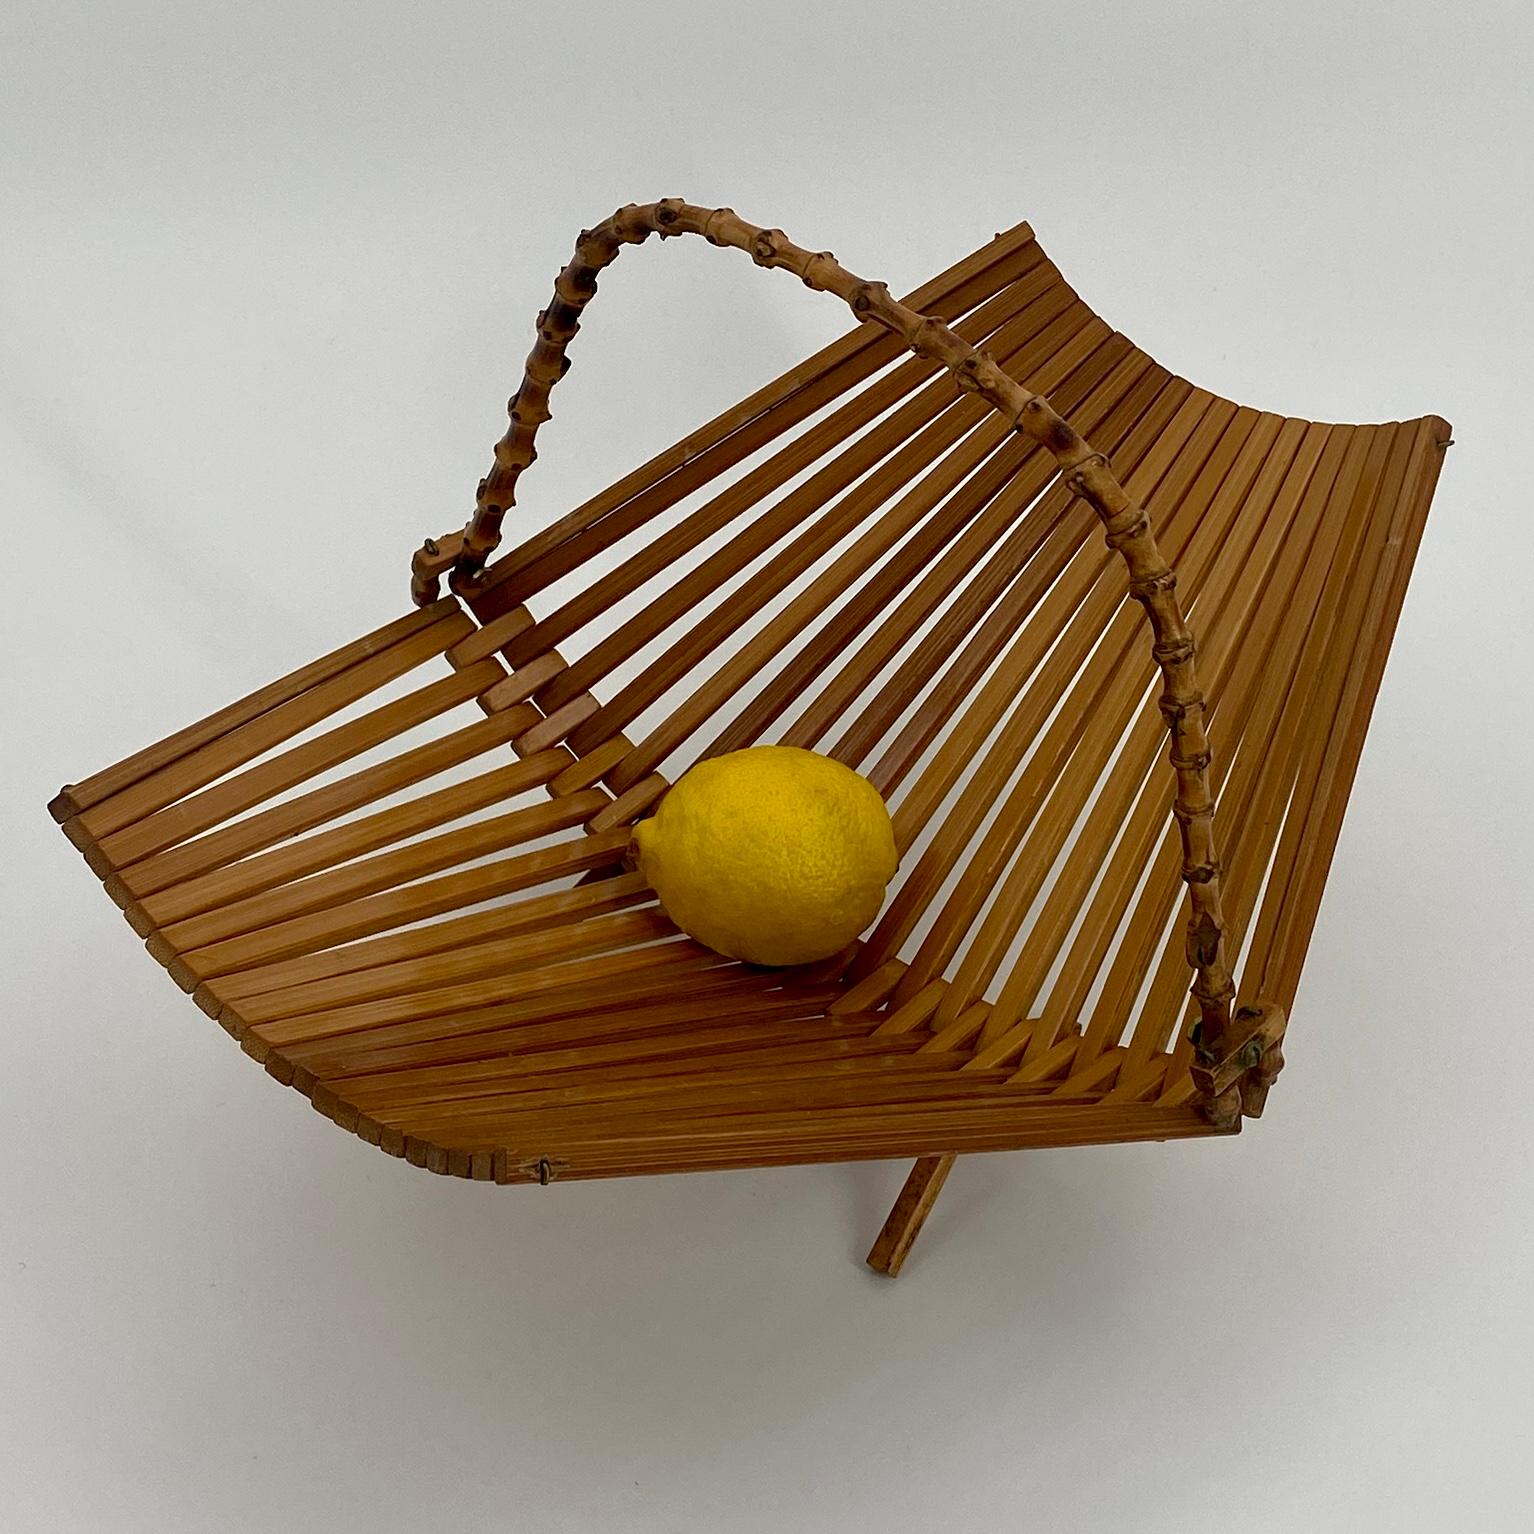 Architectural Bread or Fruit Kitchen Basket with Bamboo Handle, Denmark 11